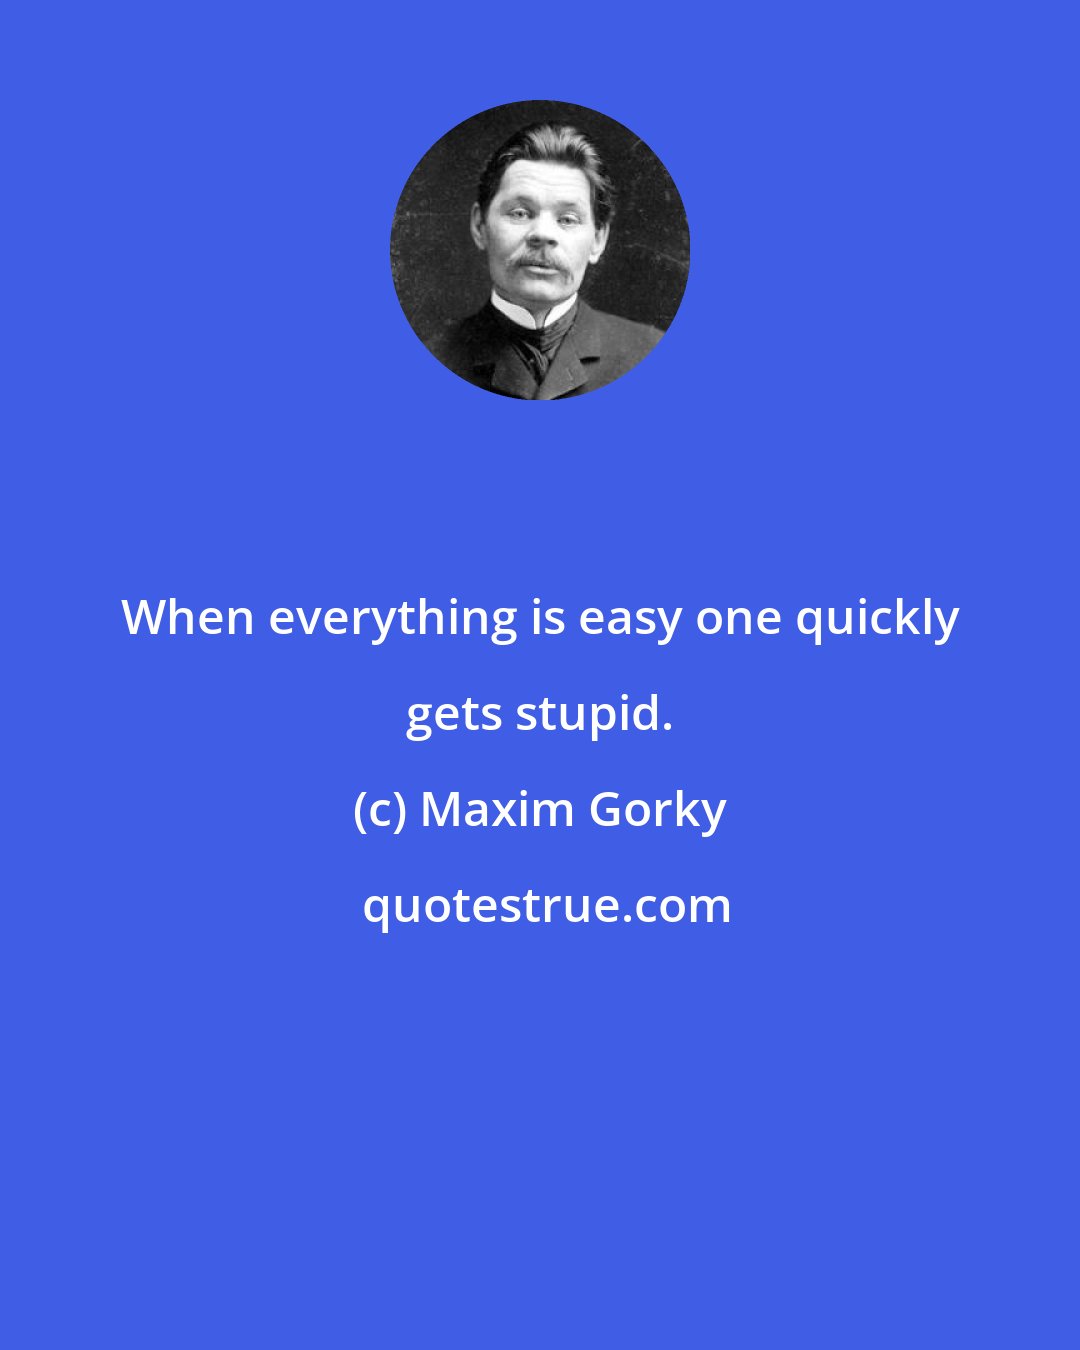 Maxim Gorky: When everything is easy one quickly gets stupid.